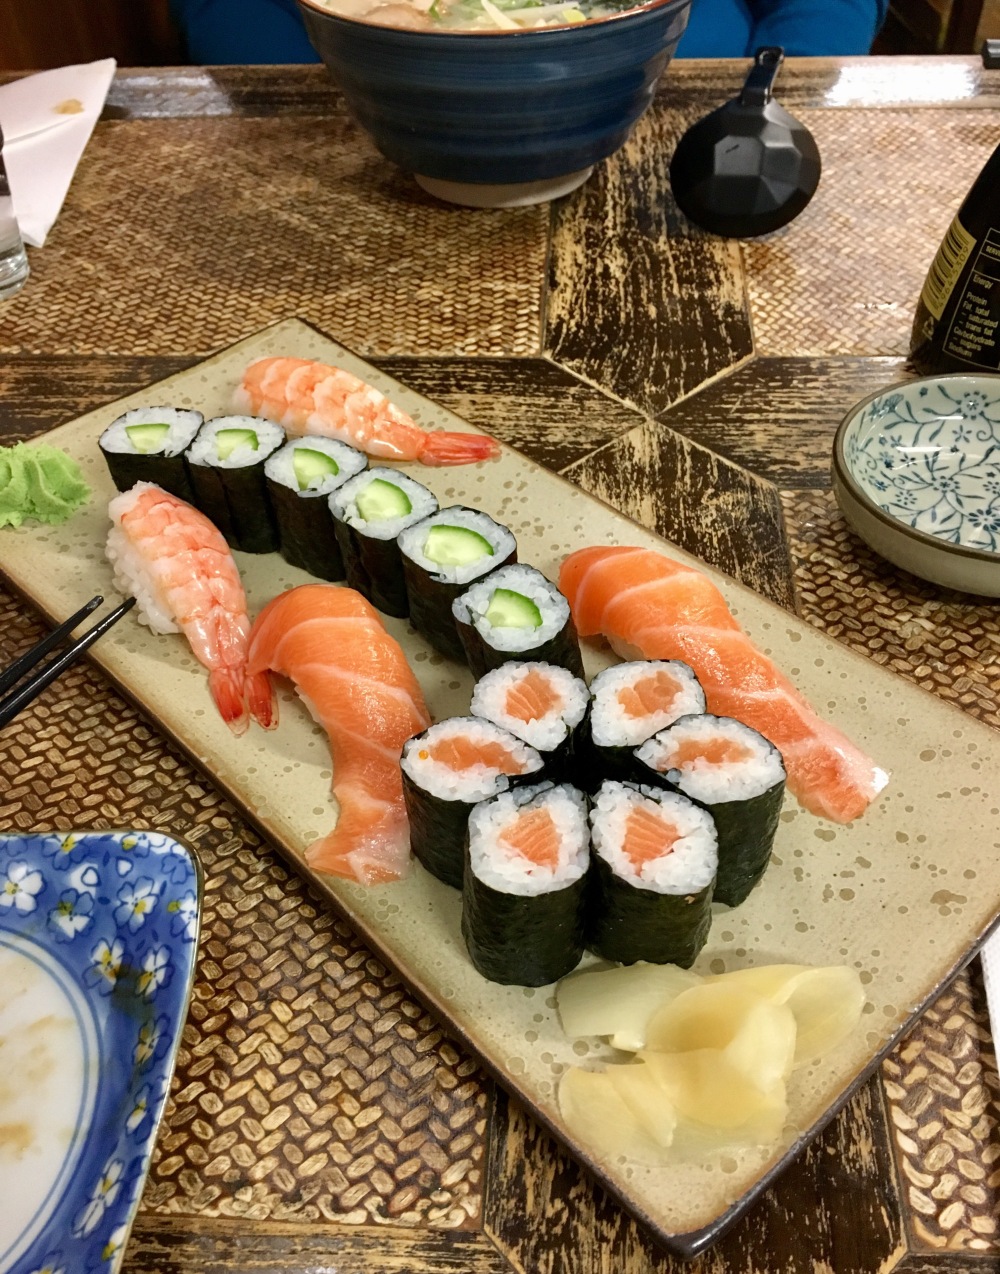 Picture of slices of sushi roll and sashimi